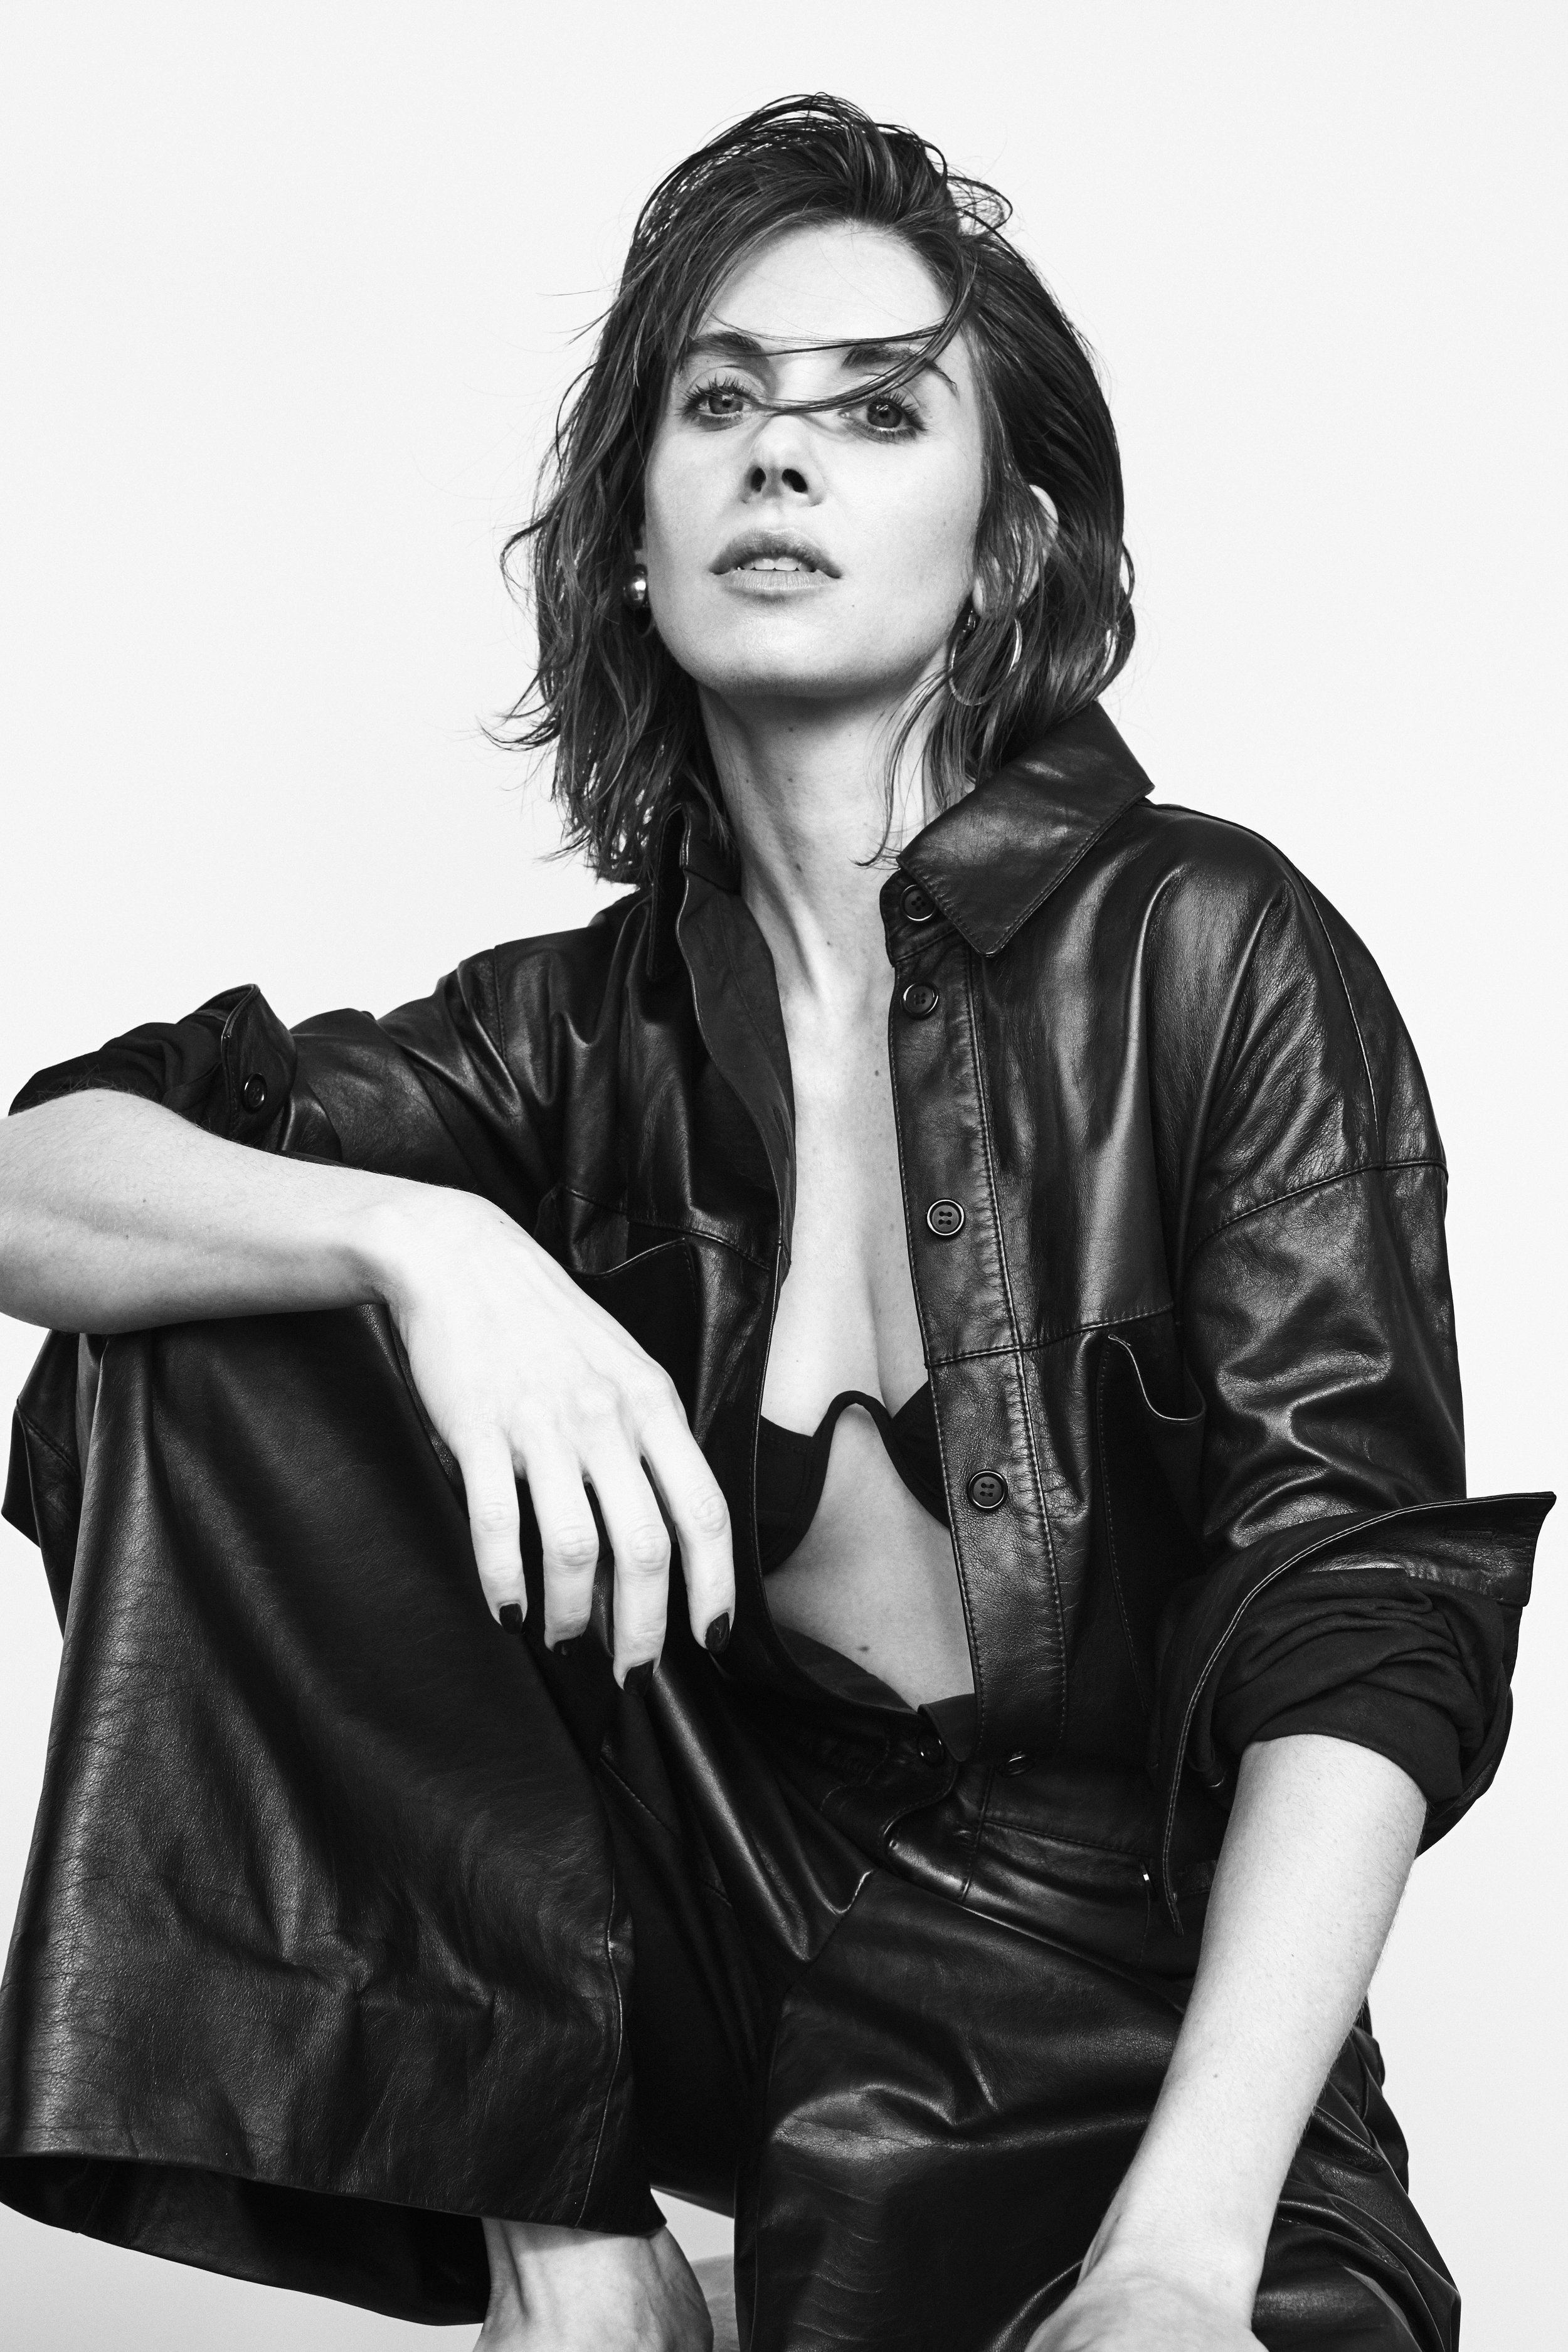   The Sunday Times Style Magazine - Alison Brie  